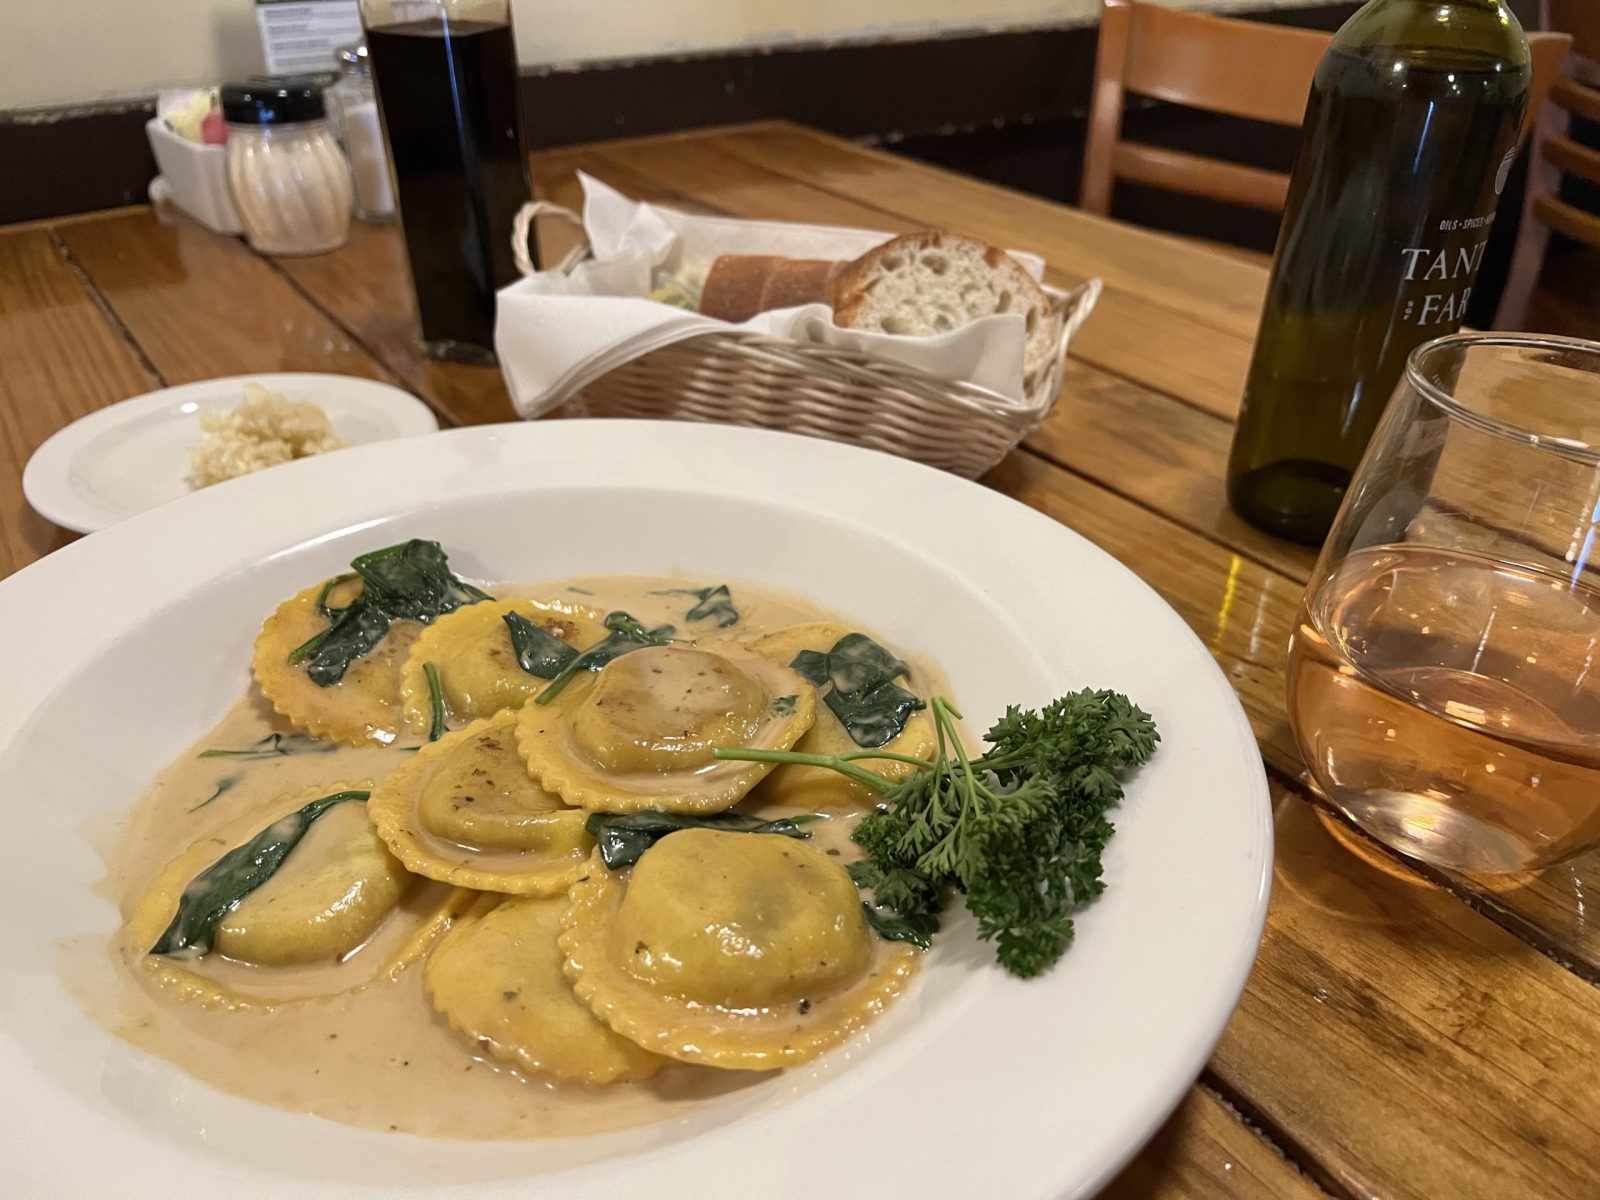 A plate of ravioli sits on a table, surrounded by bread and wine